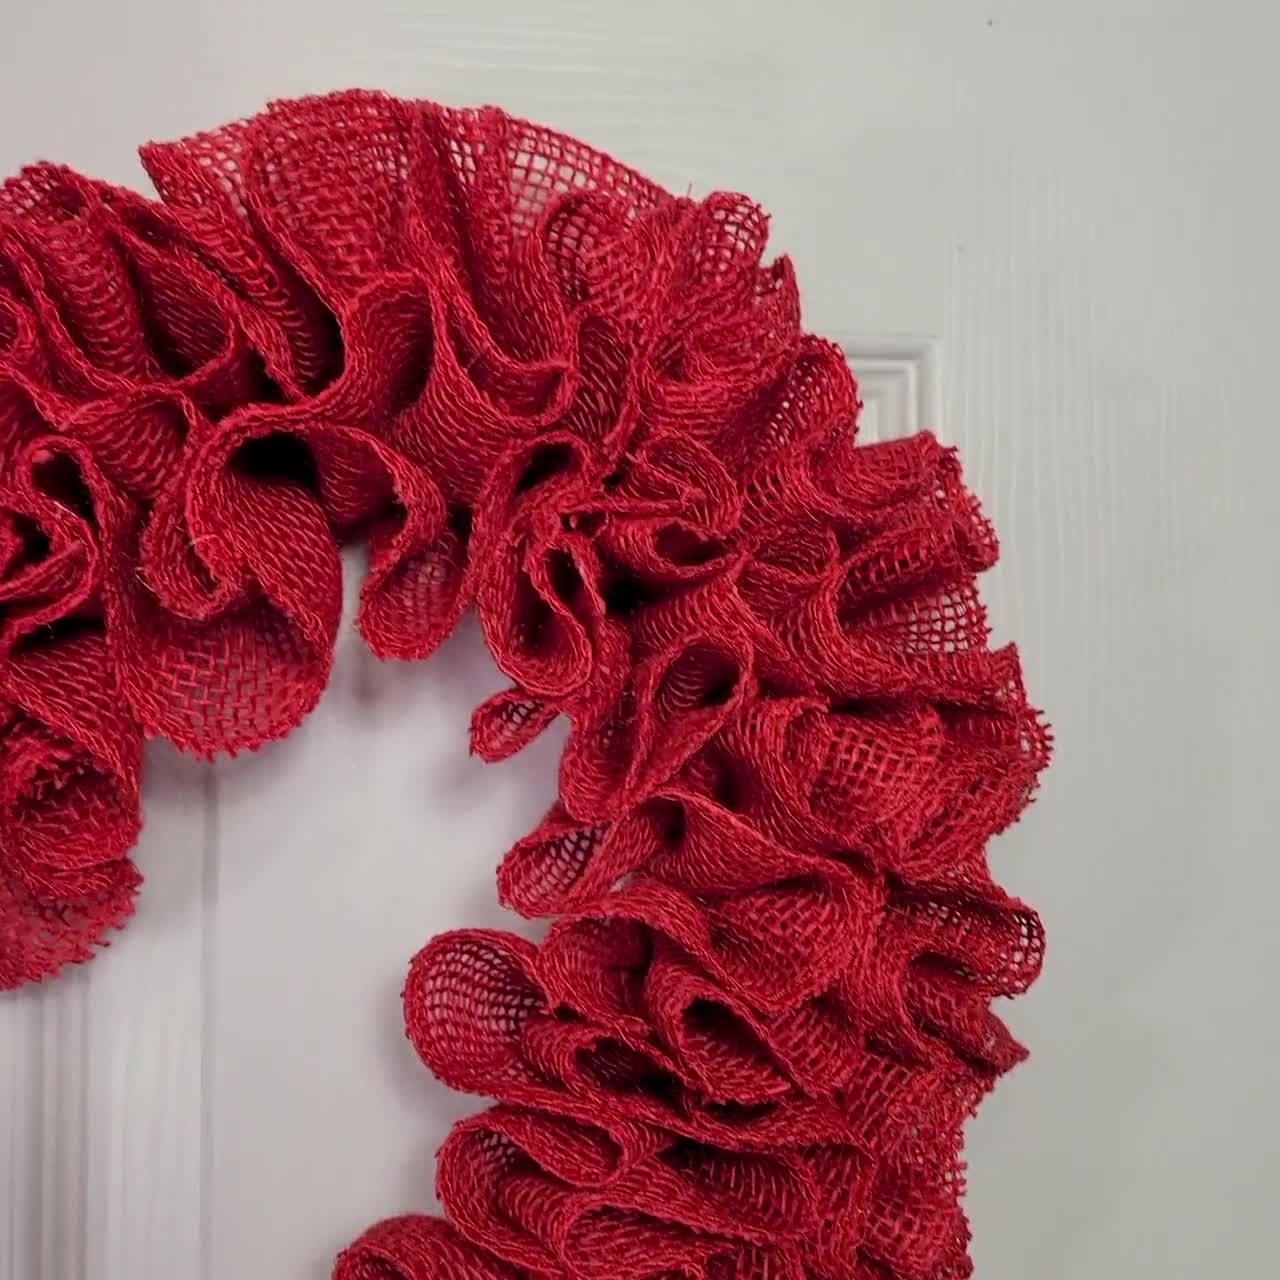 Ombre Felt DIY Valentine Heart Wreath - The Crafting Nook